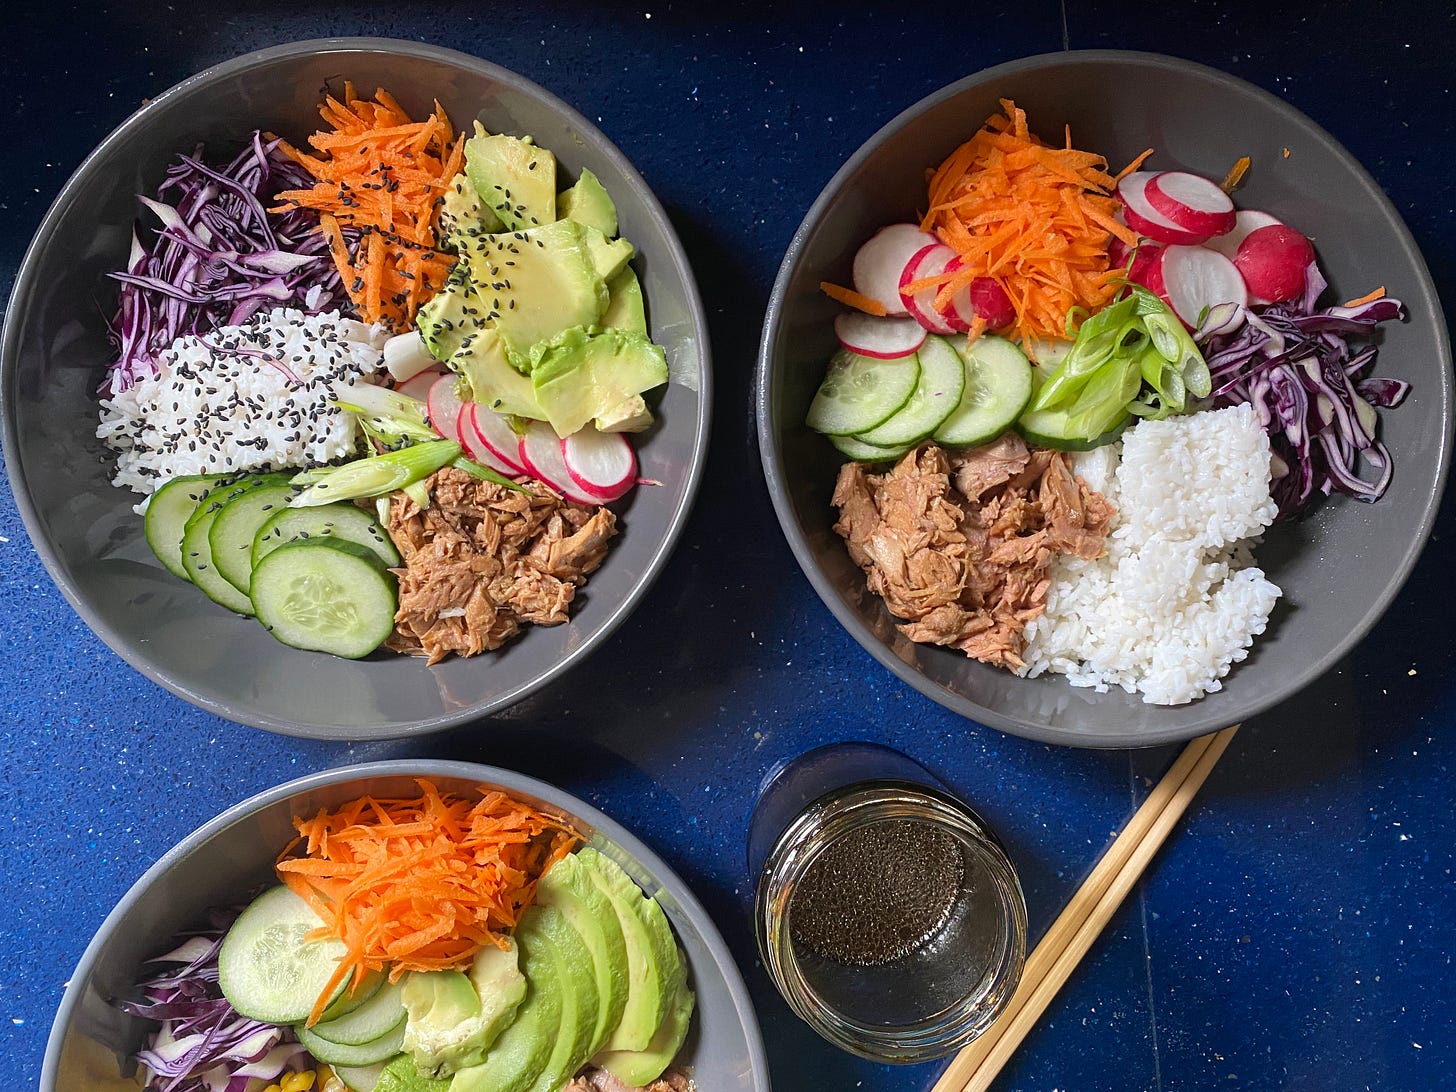 Three grey bowls on a blue quartz worktop. Each bowl is filled with chopped and shredded vegetables, some rice and tuna. A jar of sauce is next to them, and a set of chopsticks.